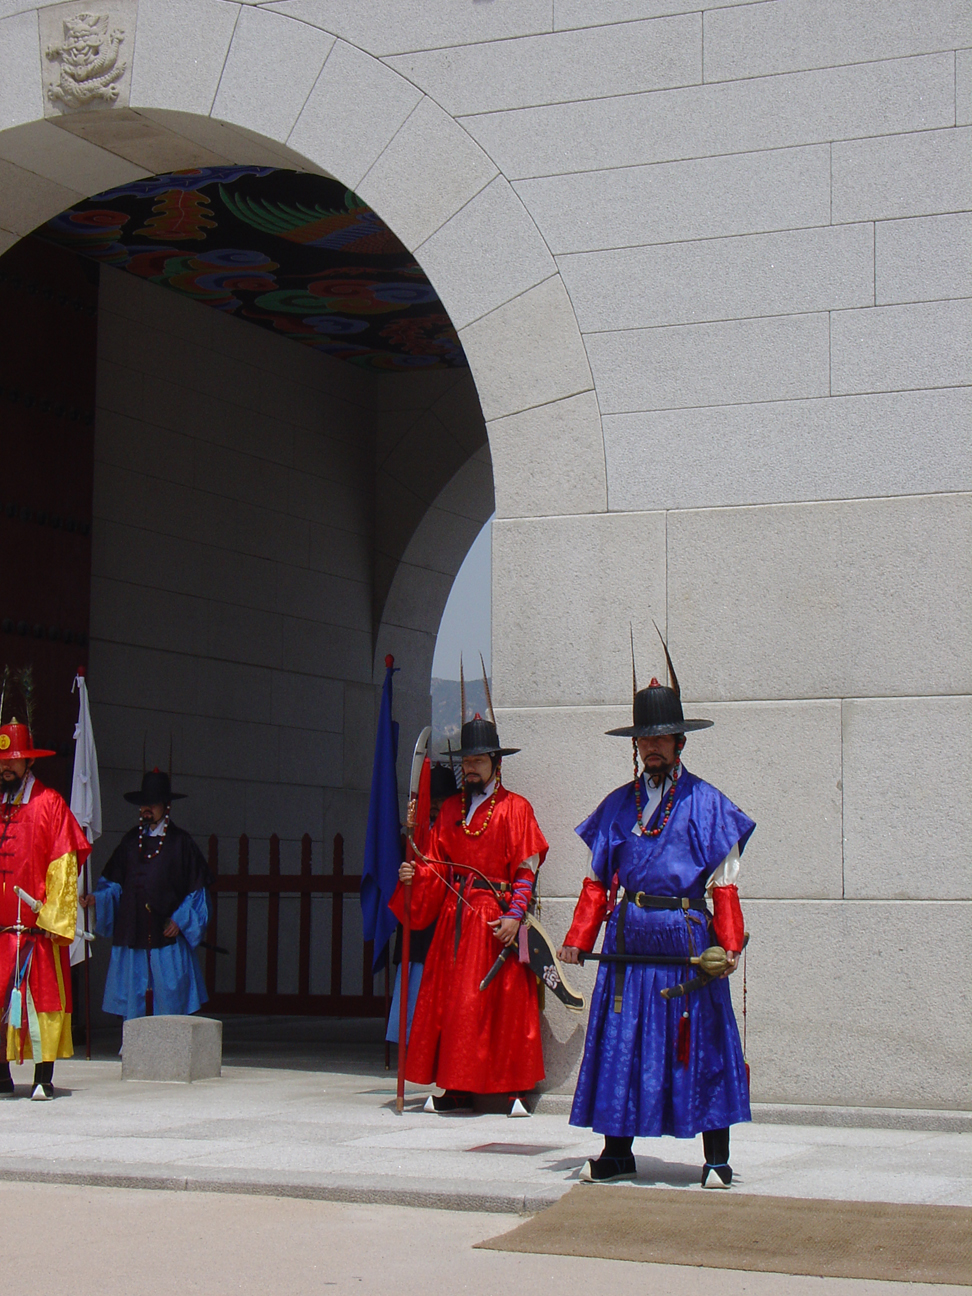 Guards in traditional dresses standing at the front entrance.